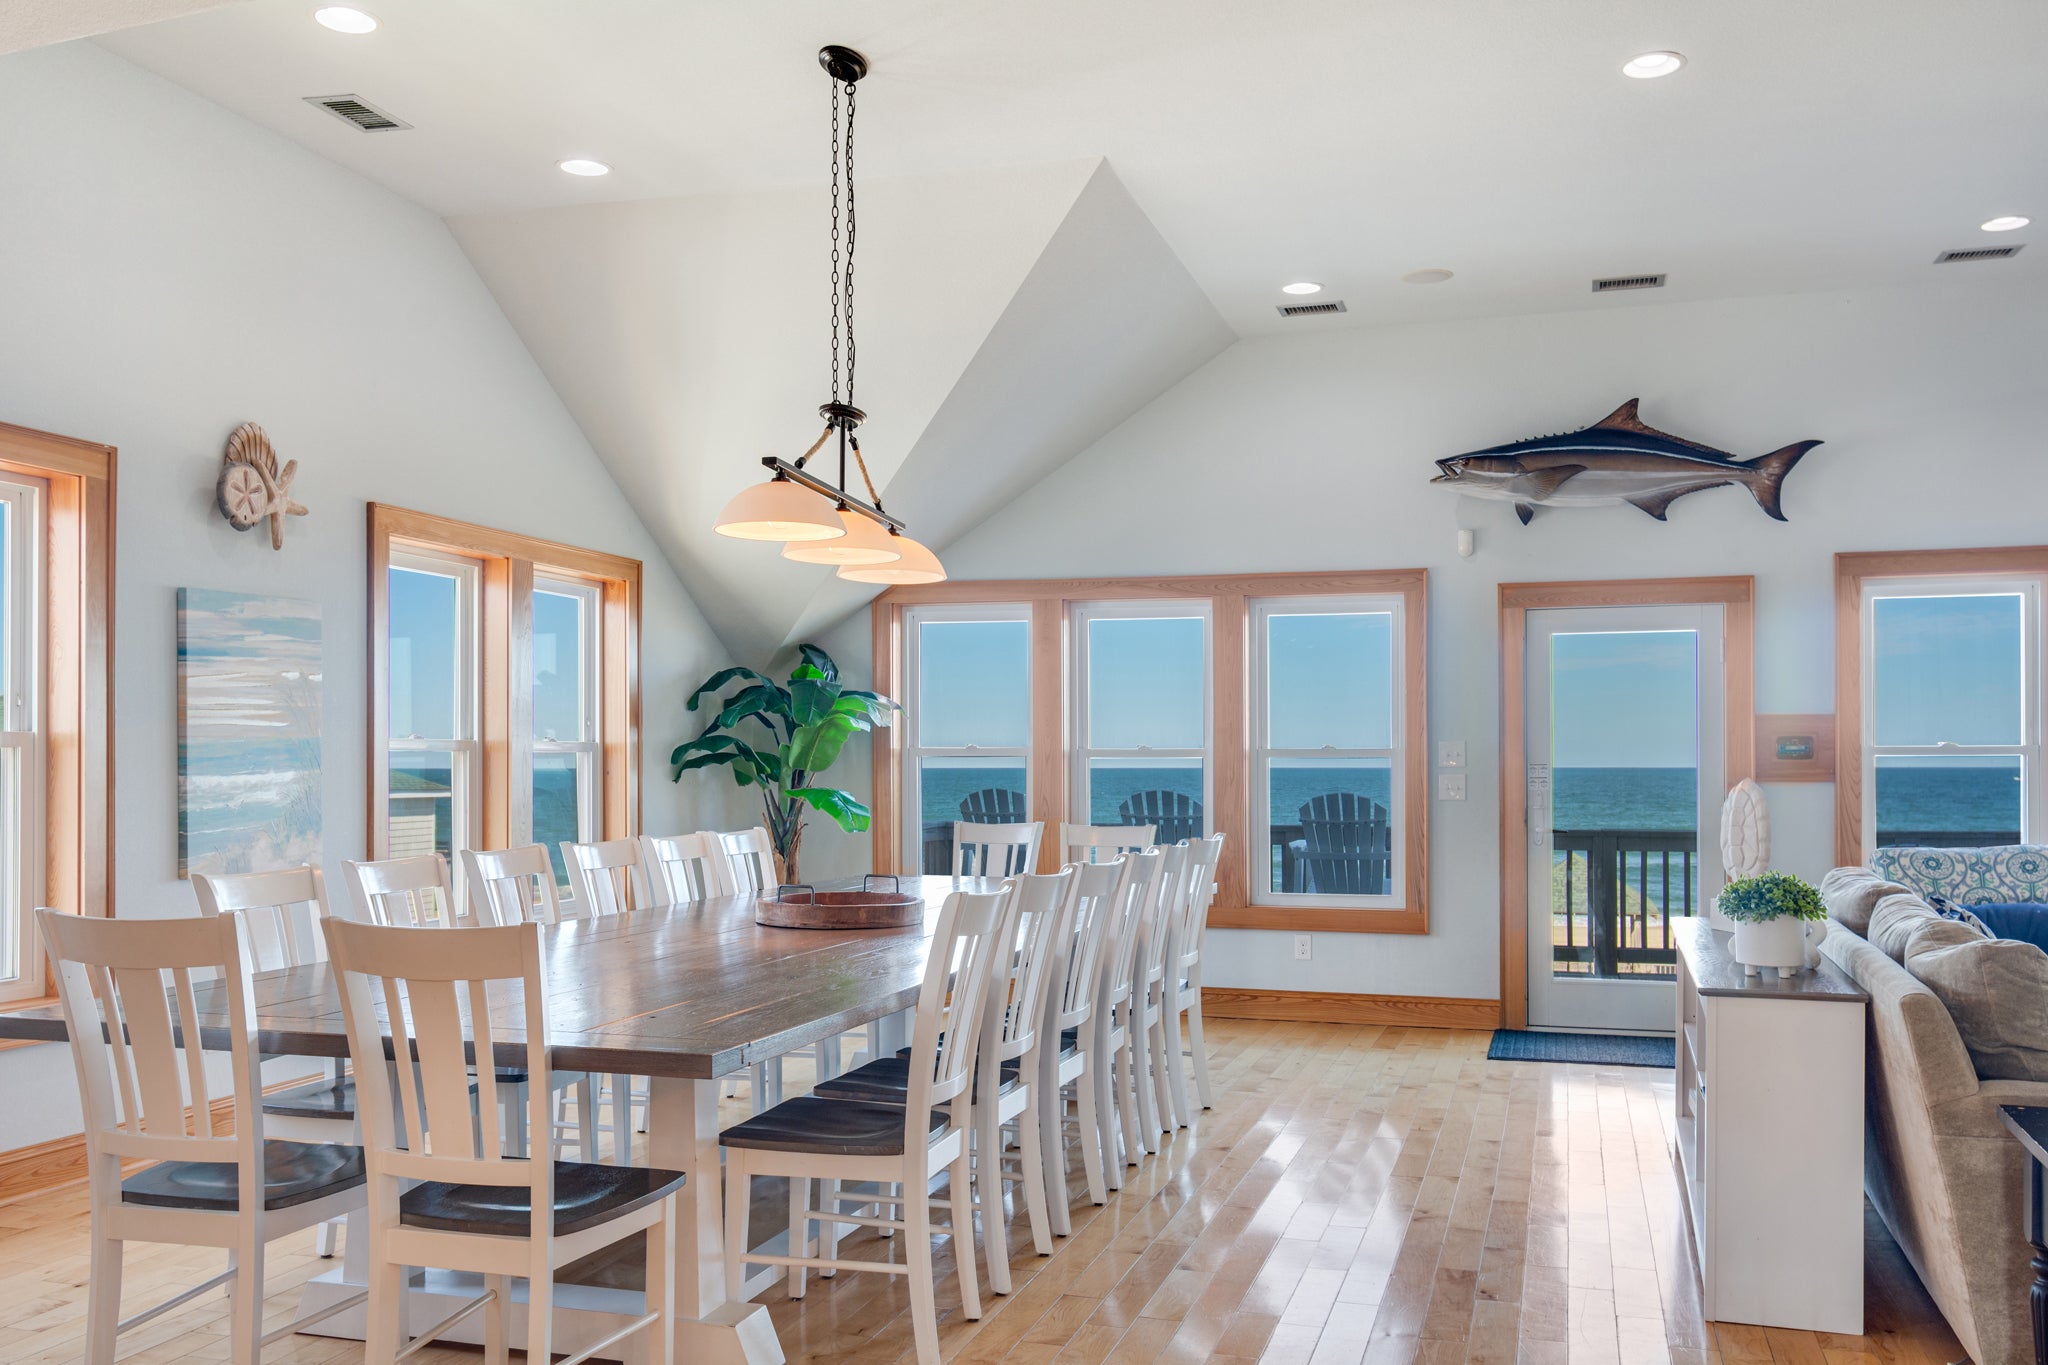 SN06: Cobia |  Top Level Dining Area